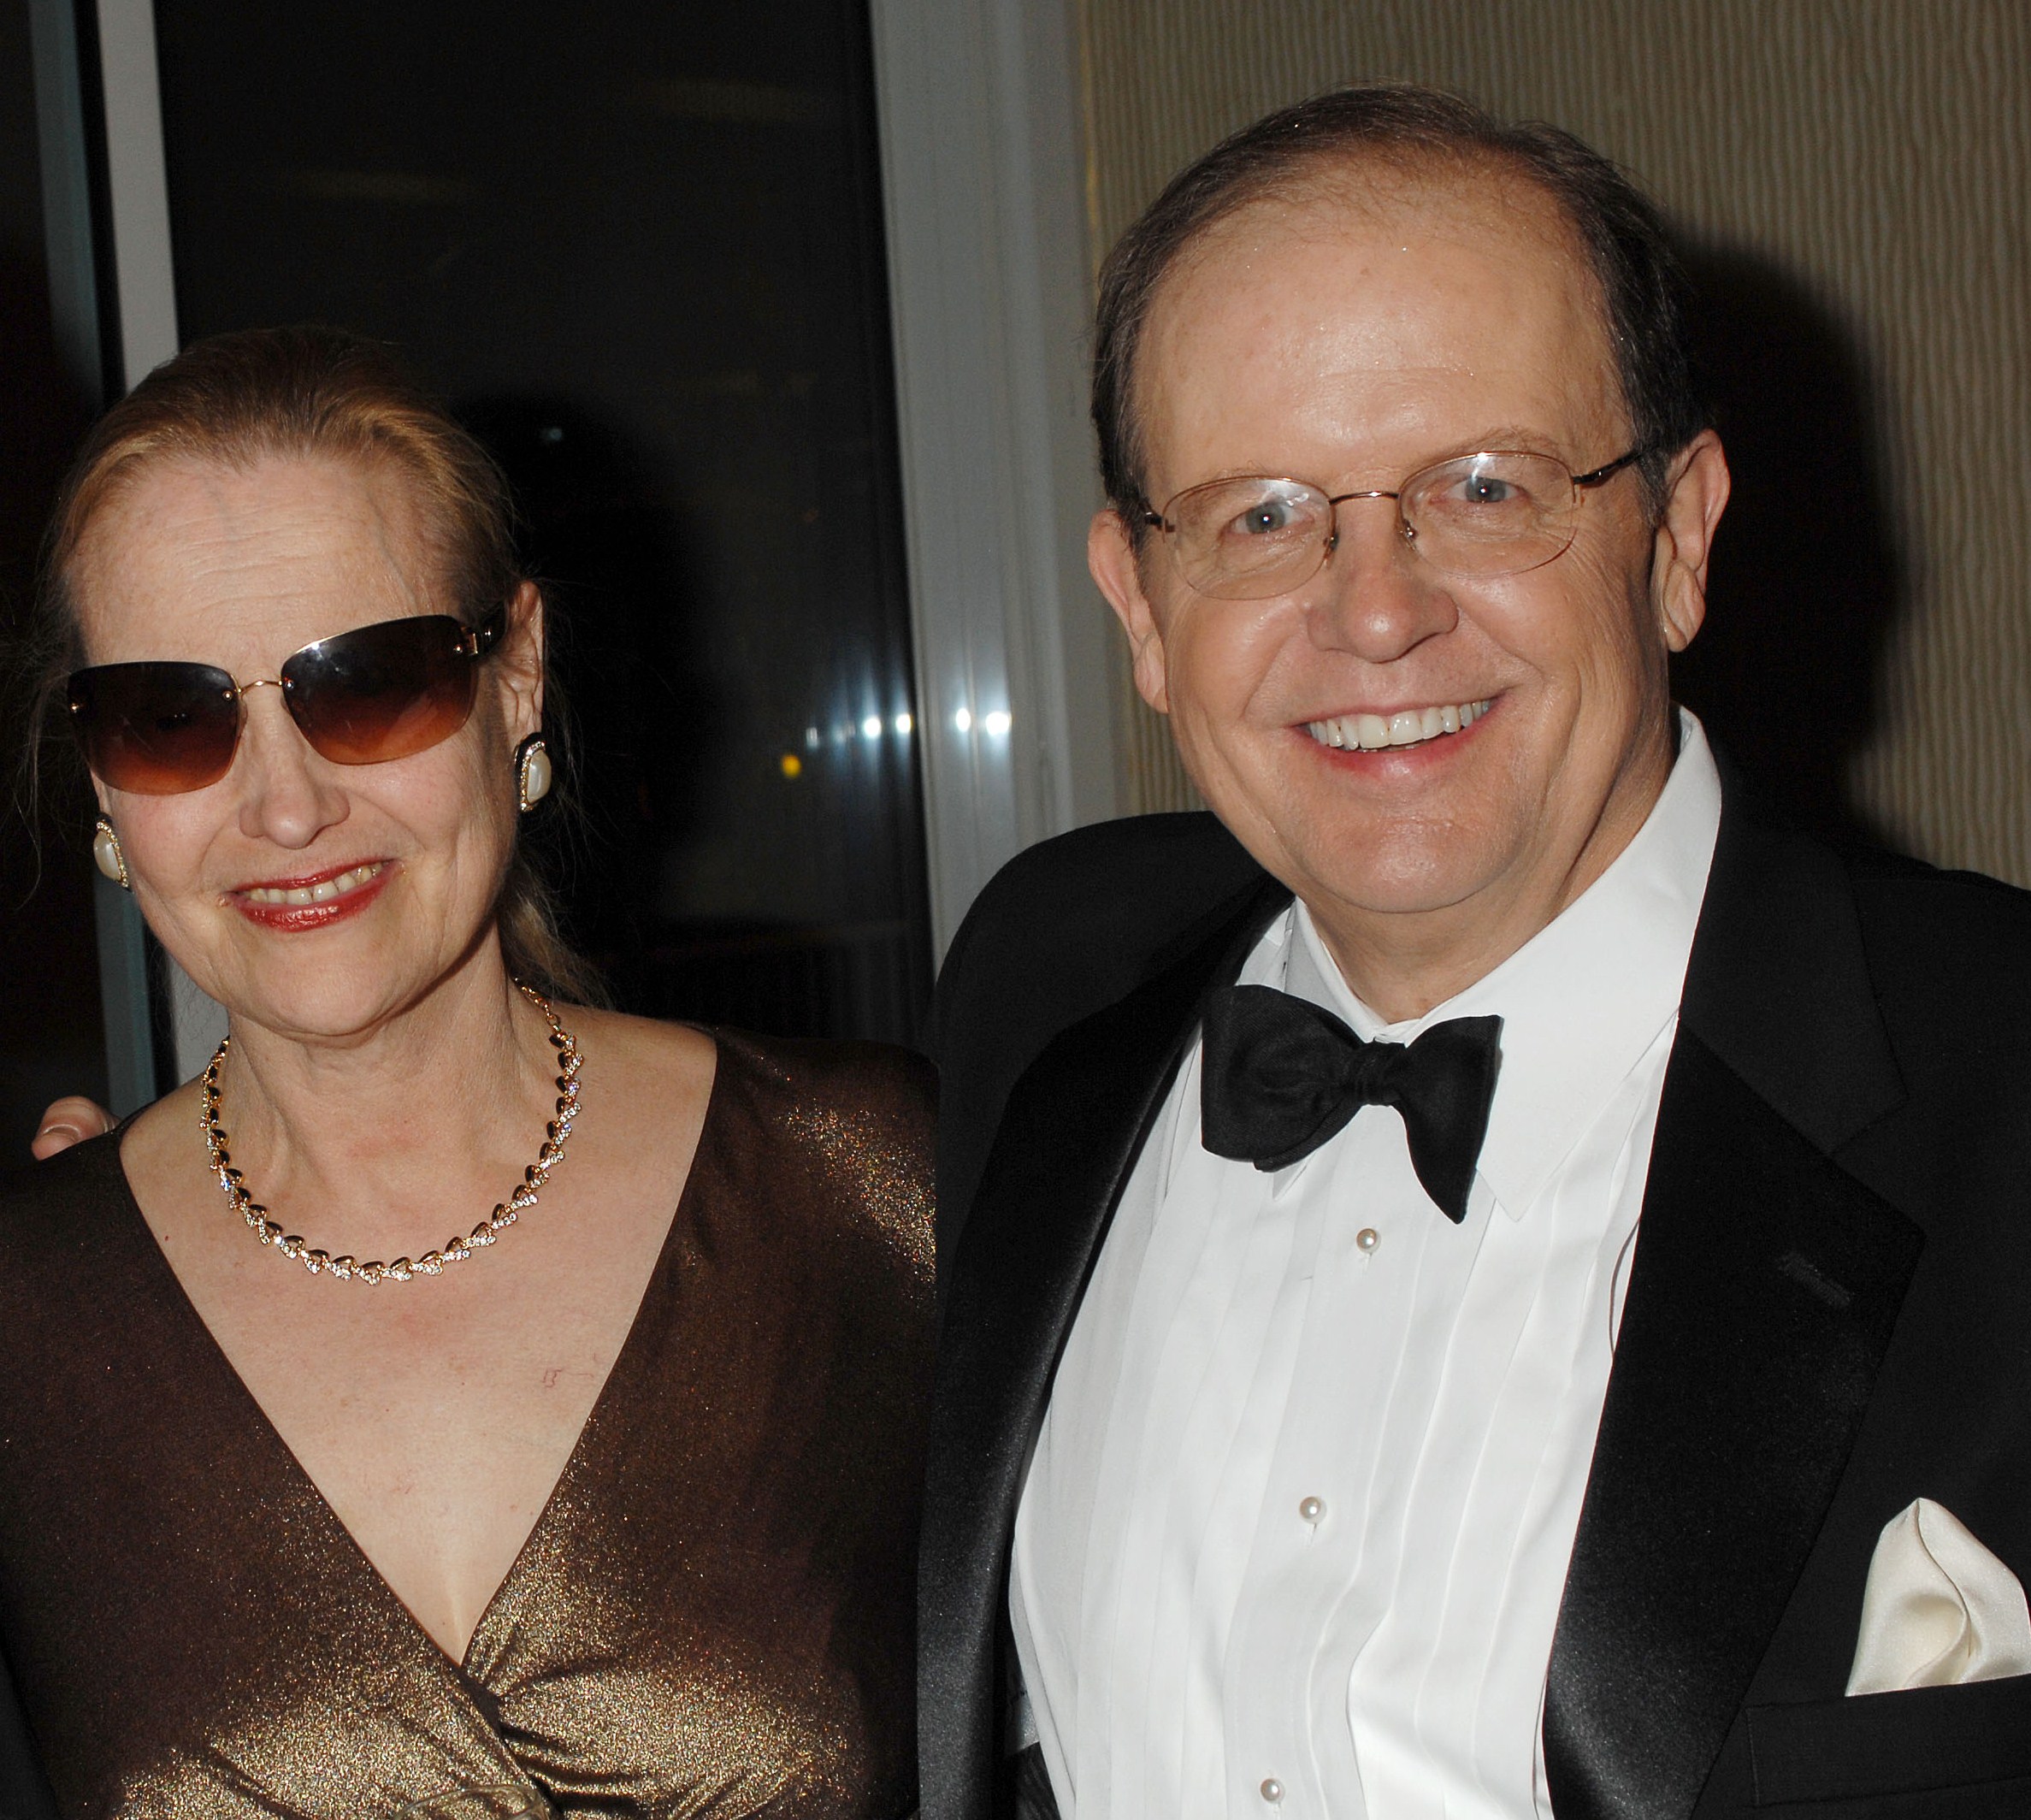 Dr. Ted Beahr, Founder of MOVIEGUIDE® Awards and Mrs. Lili Baehr, Executive Producer of the MOVIEGUIDE® Awards Gala